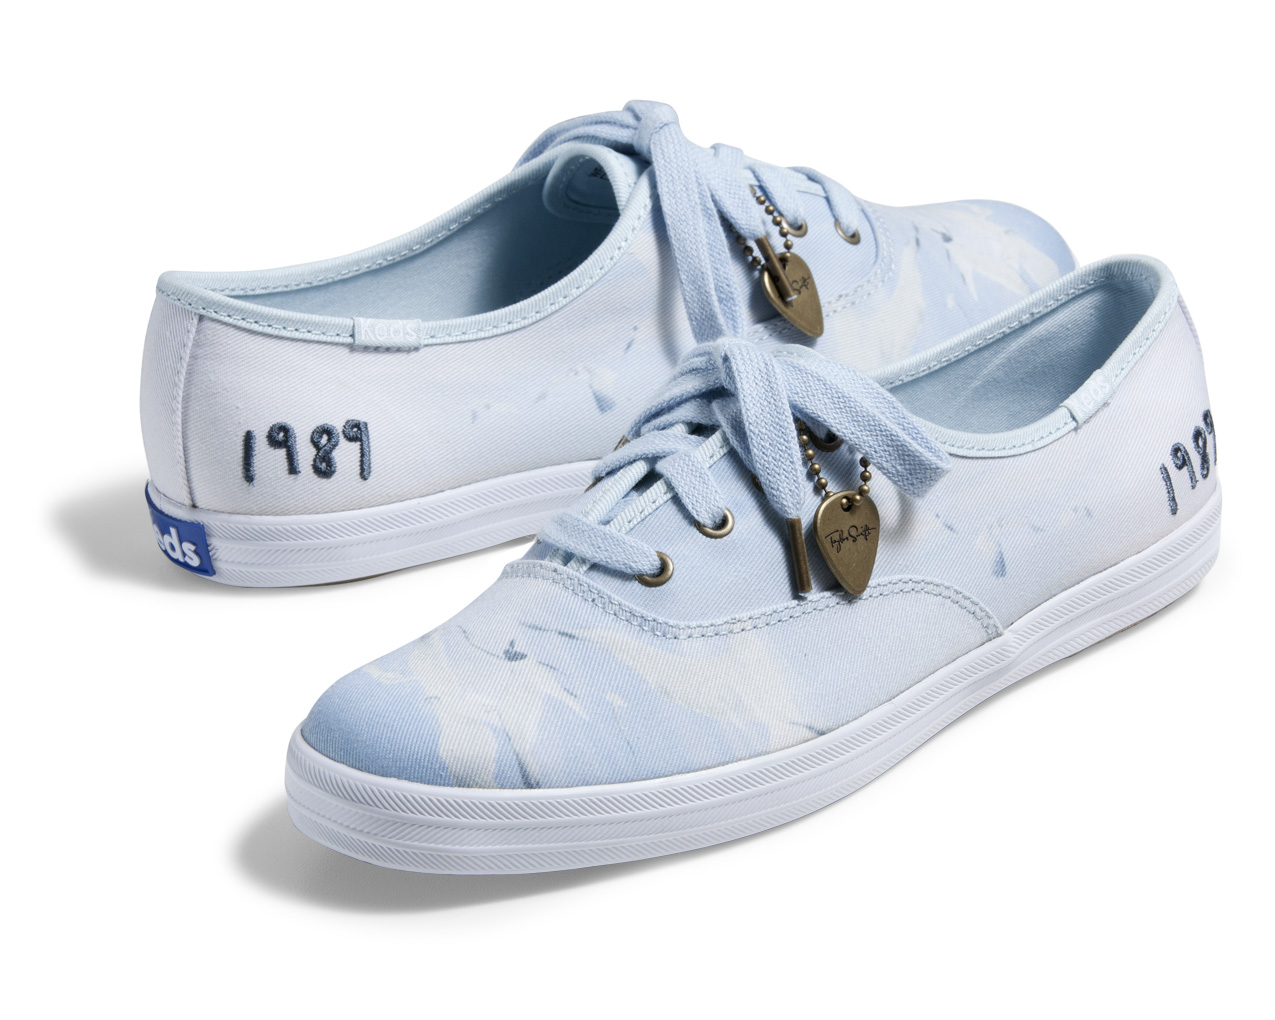 Limited Edition Collection For Keds